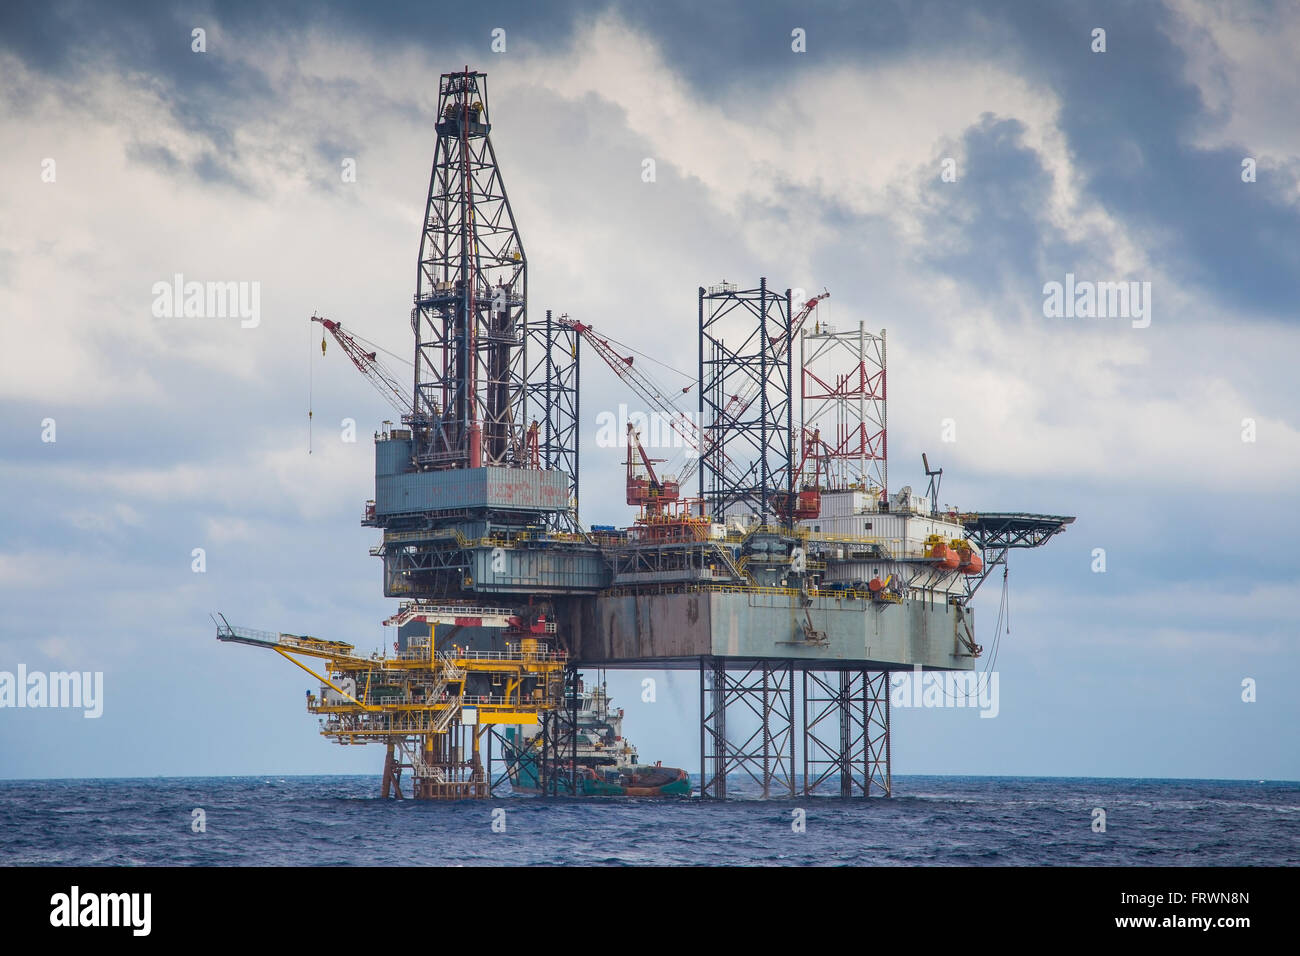 Oil and gas drilling rig work over remote wellhead platform to completion oil and gas produce well by using drilling bit which m Stock Photo